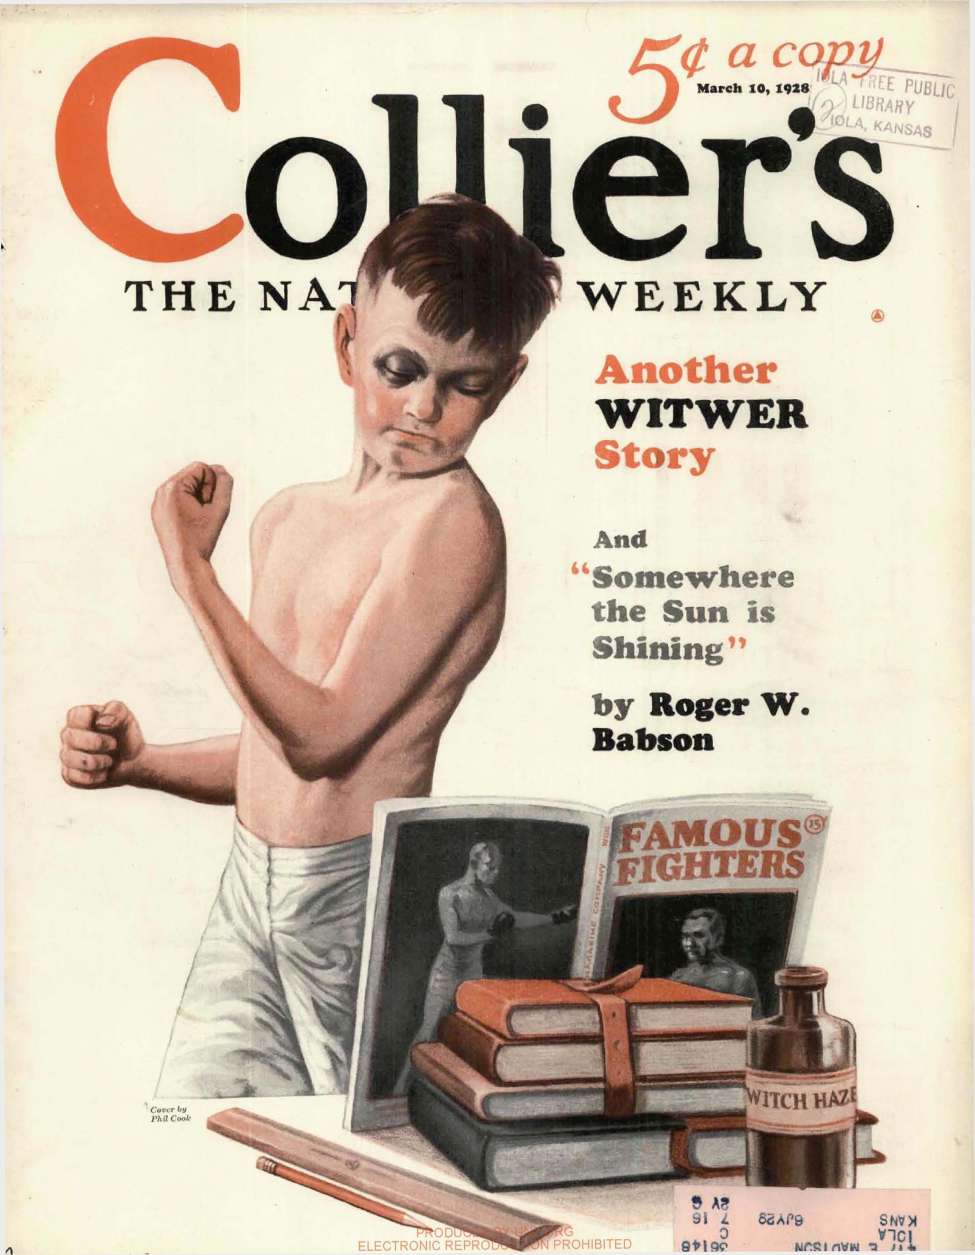 Book Cover For Collier's Weekly v81 10